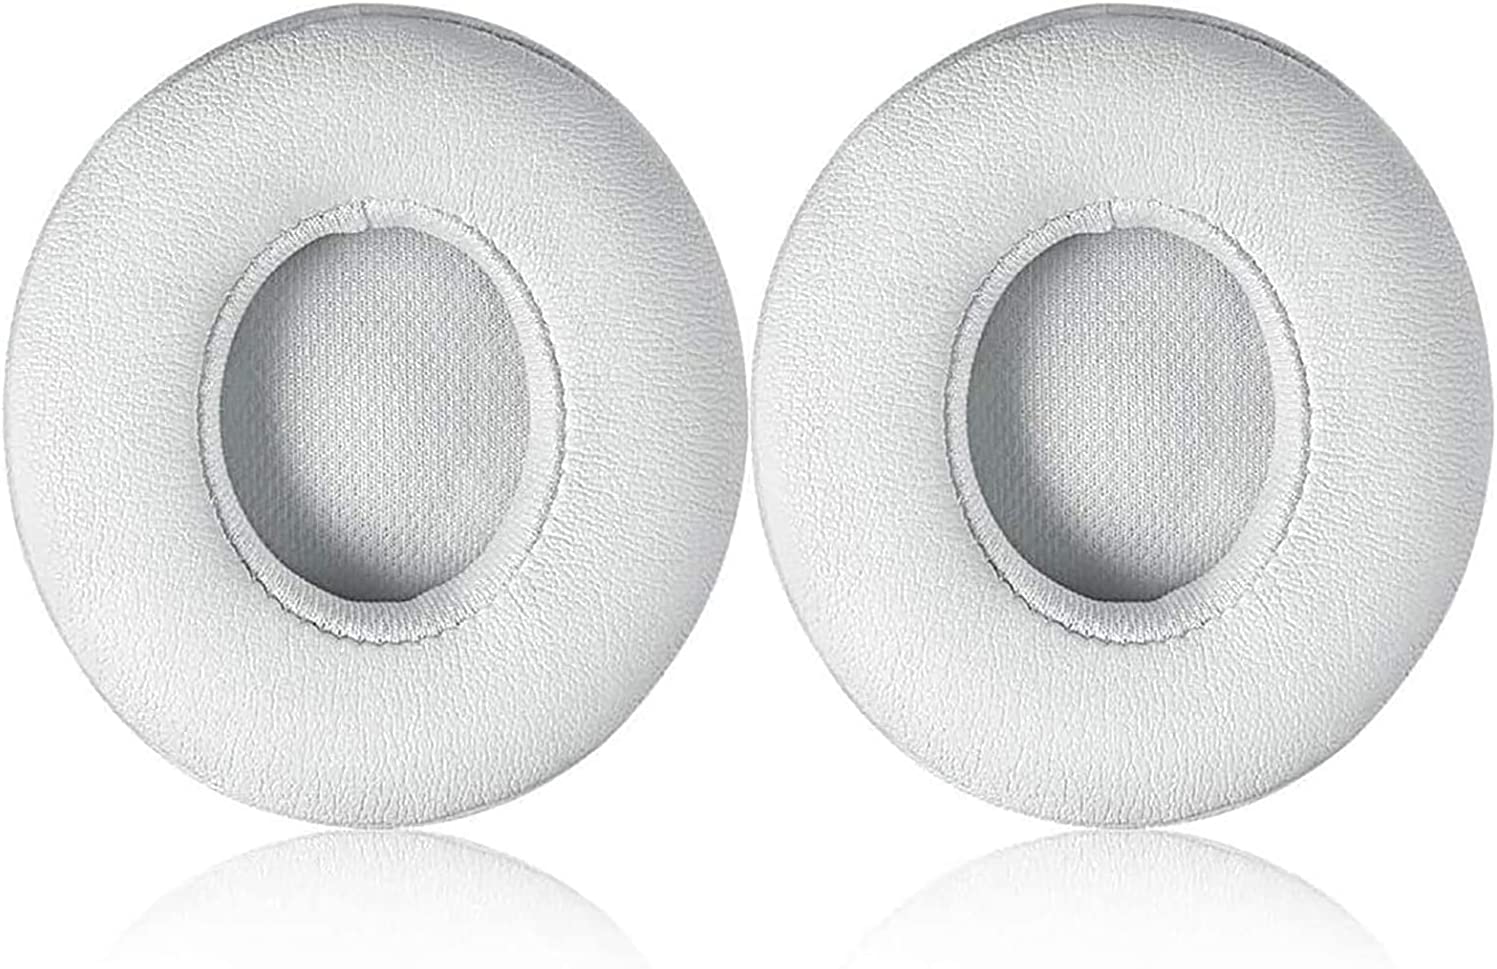 Aiivioll Replacement Ear Pad Ear Cushion Ear Cups Ear Cover Earpads is Compatible with Solo 2.0 3.0 Wireless Headphone by Dr. Dre Professional Replacement Ear Pads Cushions (White) - image 1 of 5